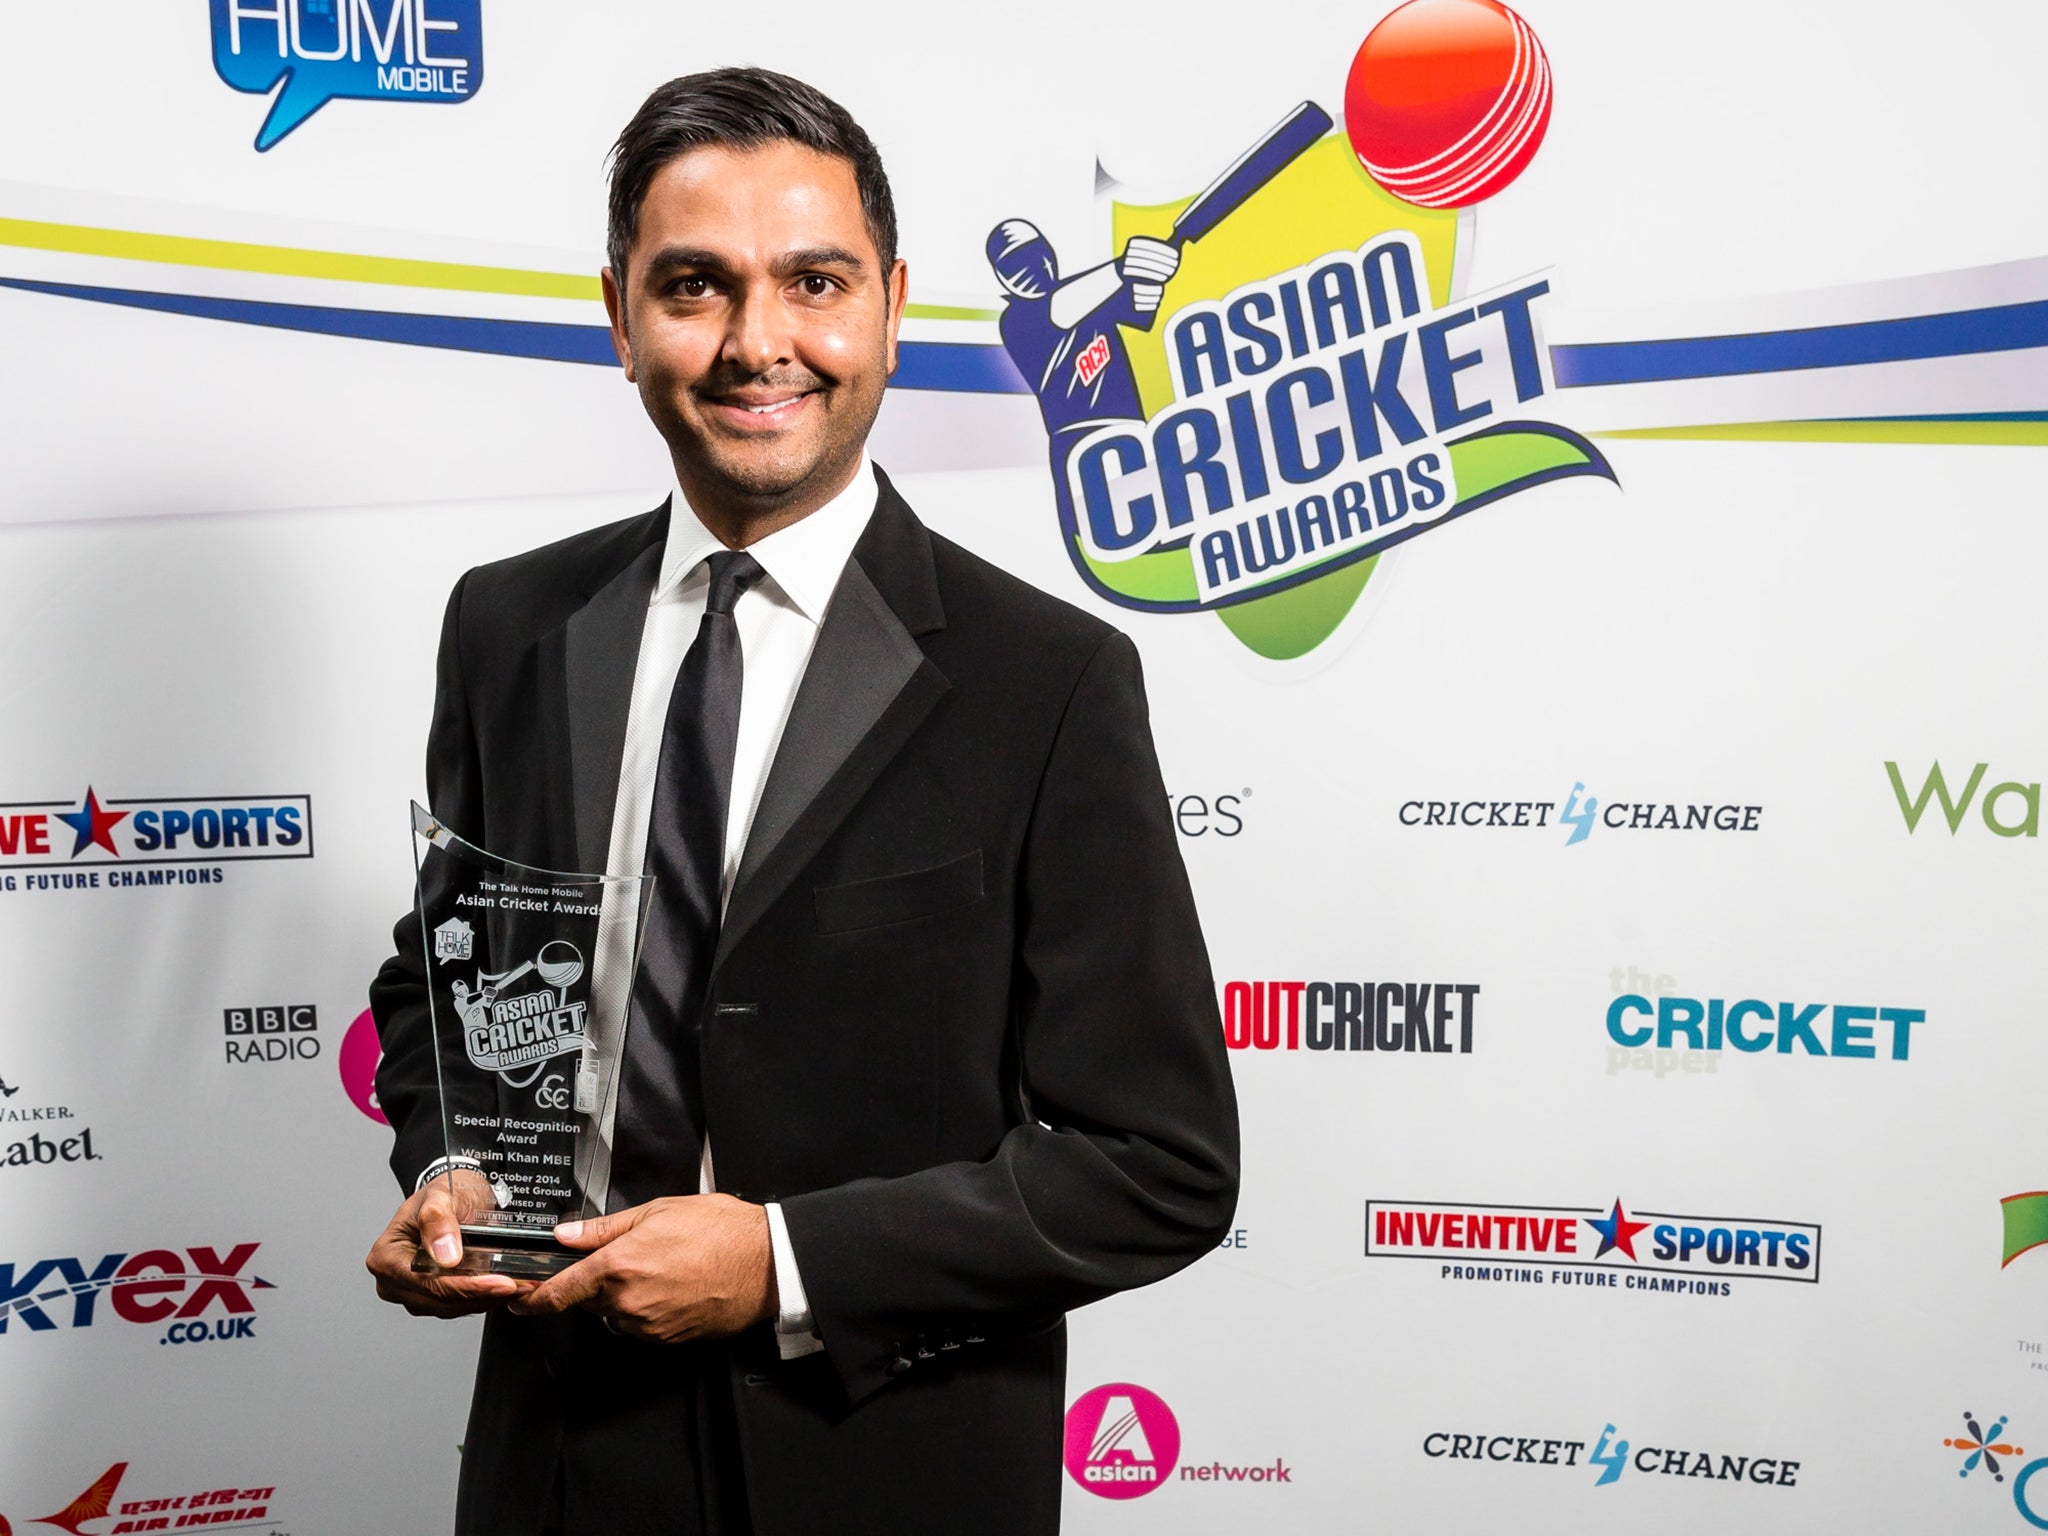 Wasim Khan winner of the Founders Special Recognition award poses with the trophy during the Asian Cricket Awards at Lords